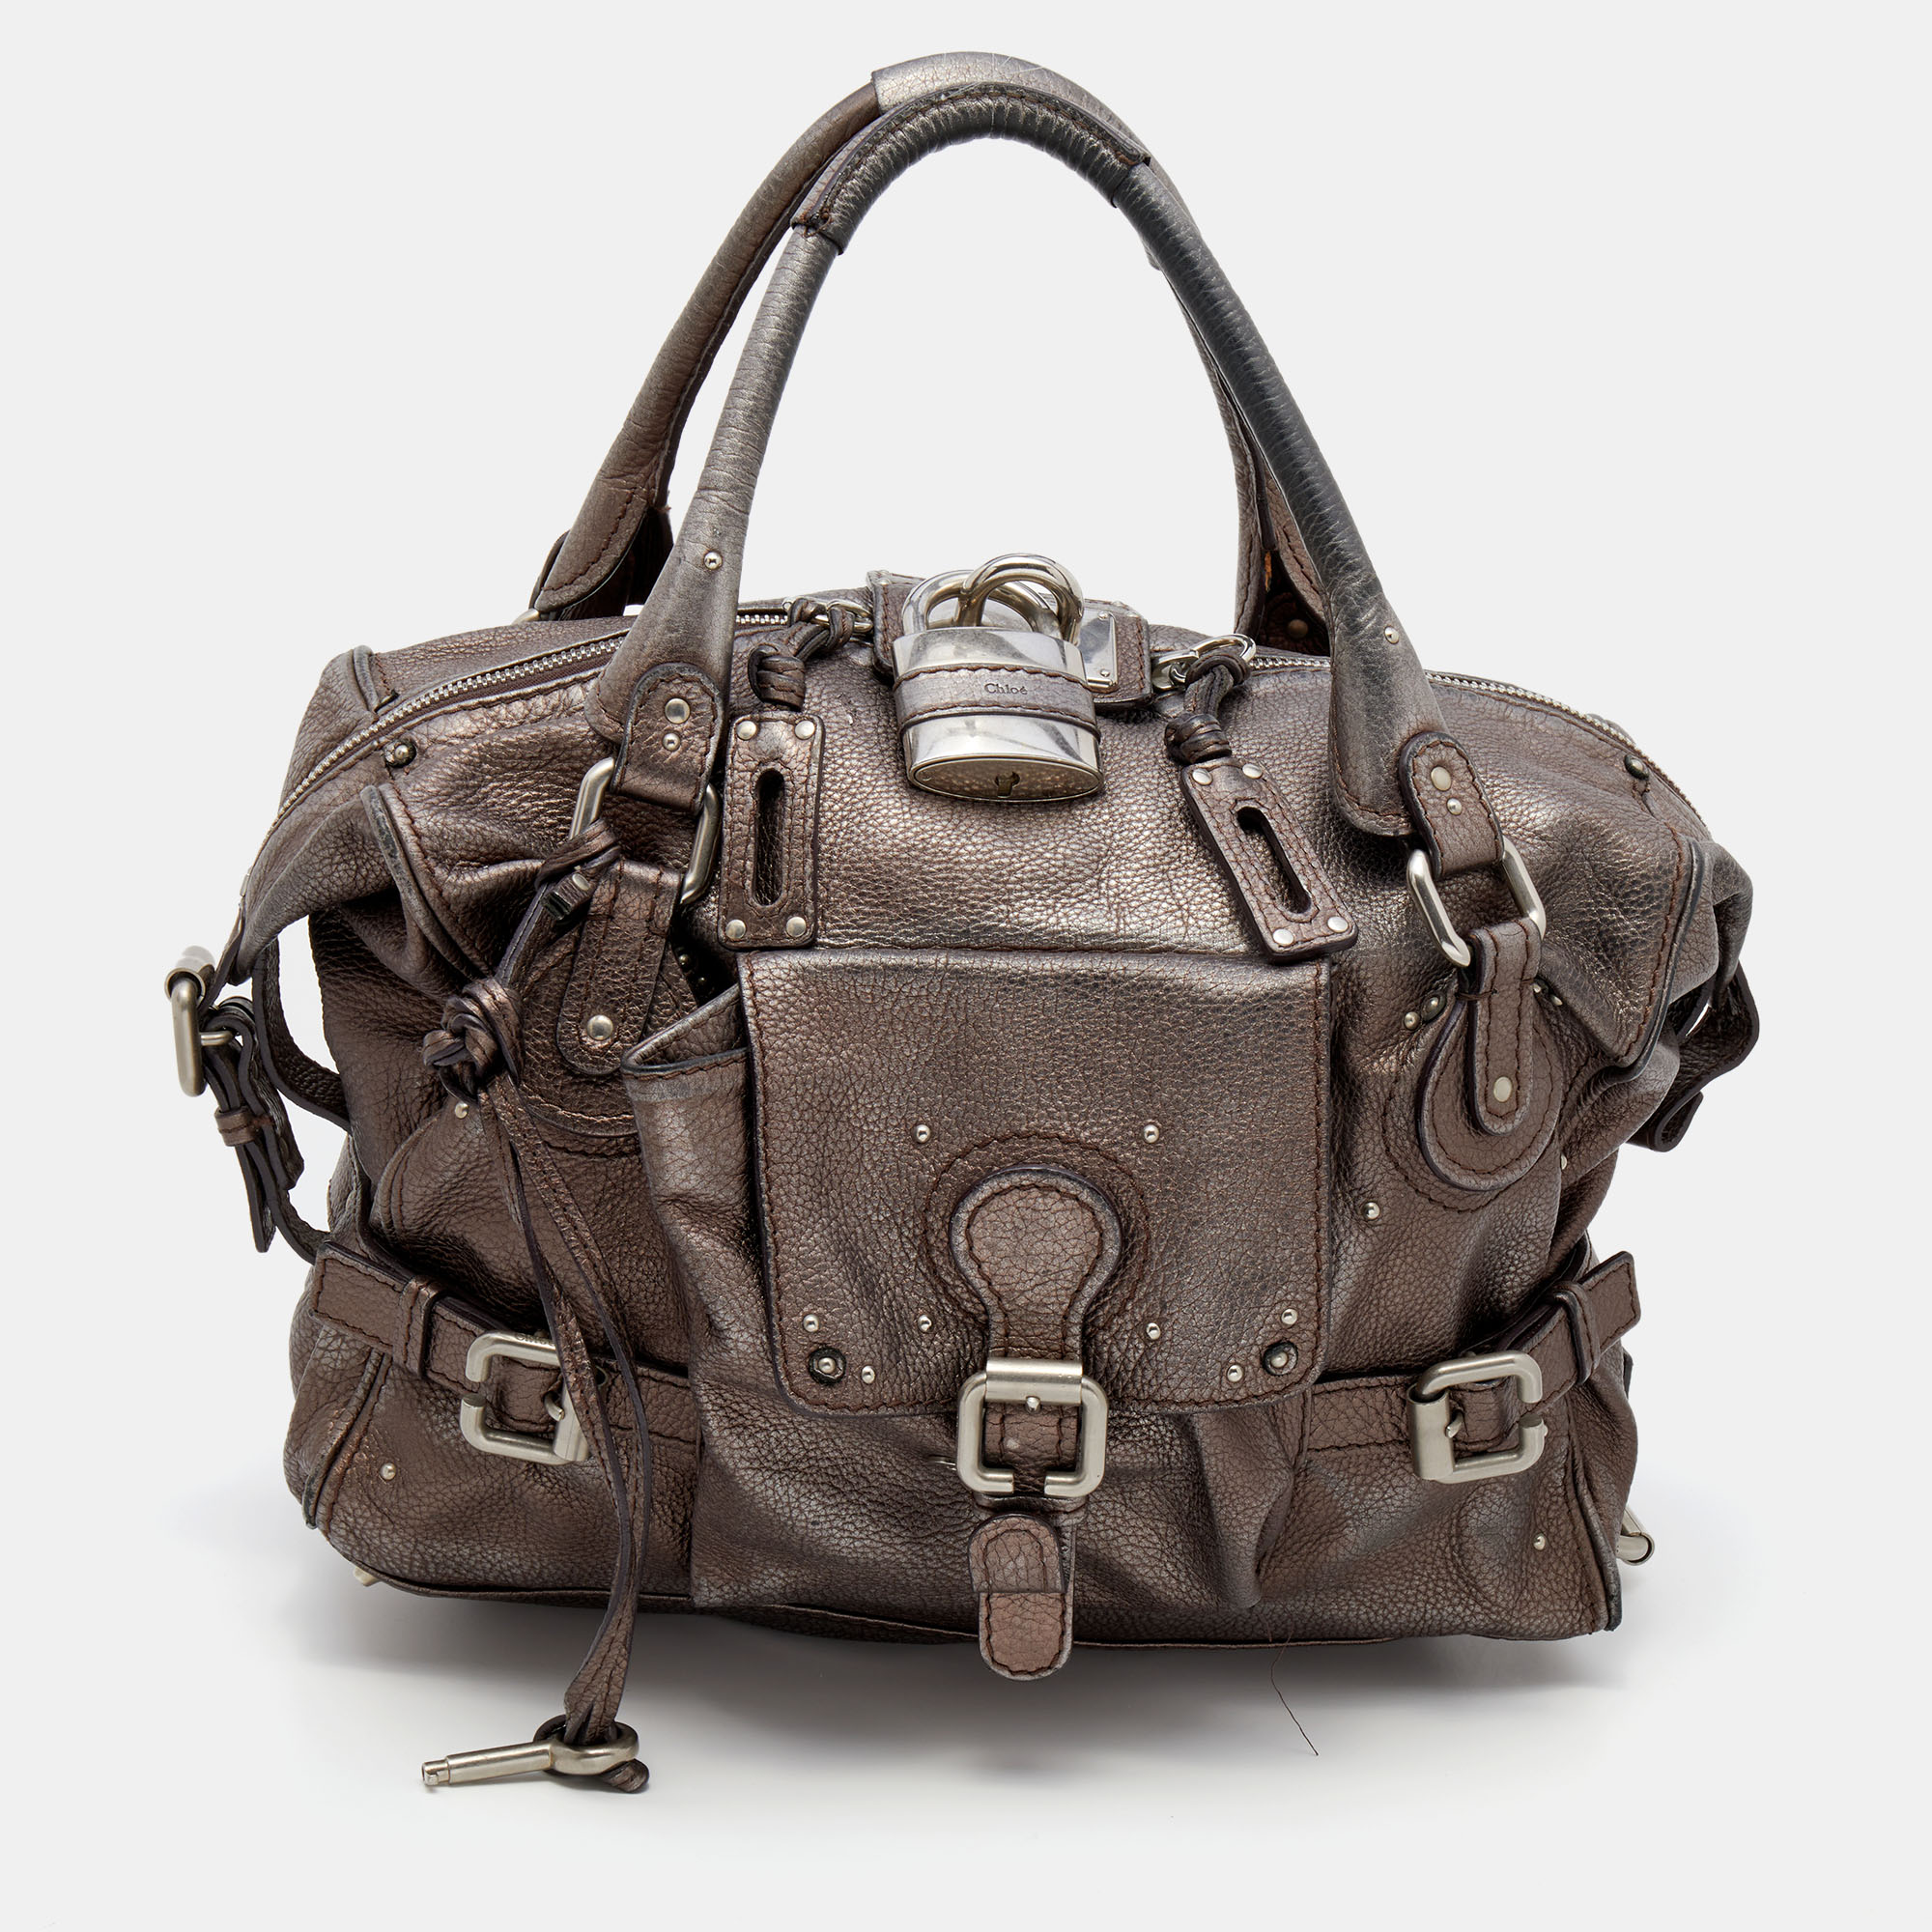 Easy to carry and stylish in appearance this Paddington satchel from the House of Chloe will certainly be your favorite pick this season. It is crafted using metallic brown leather with silver tone hardware elevating its beauty. It provides two handles and a spacious fabric lined interior.